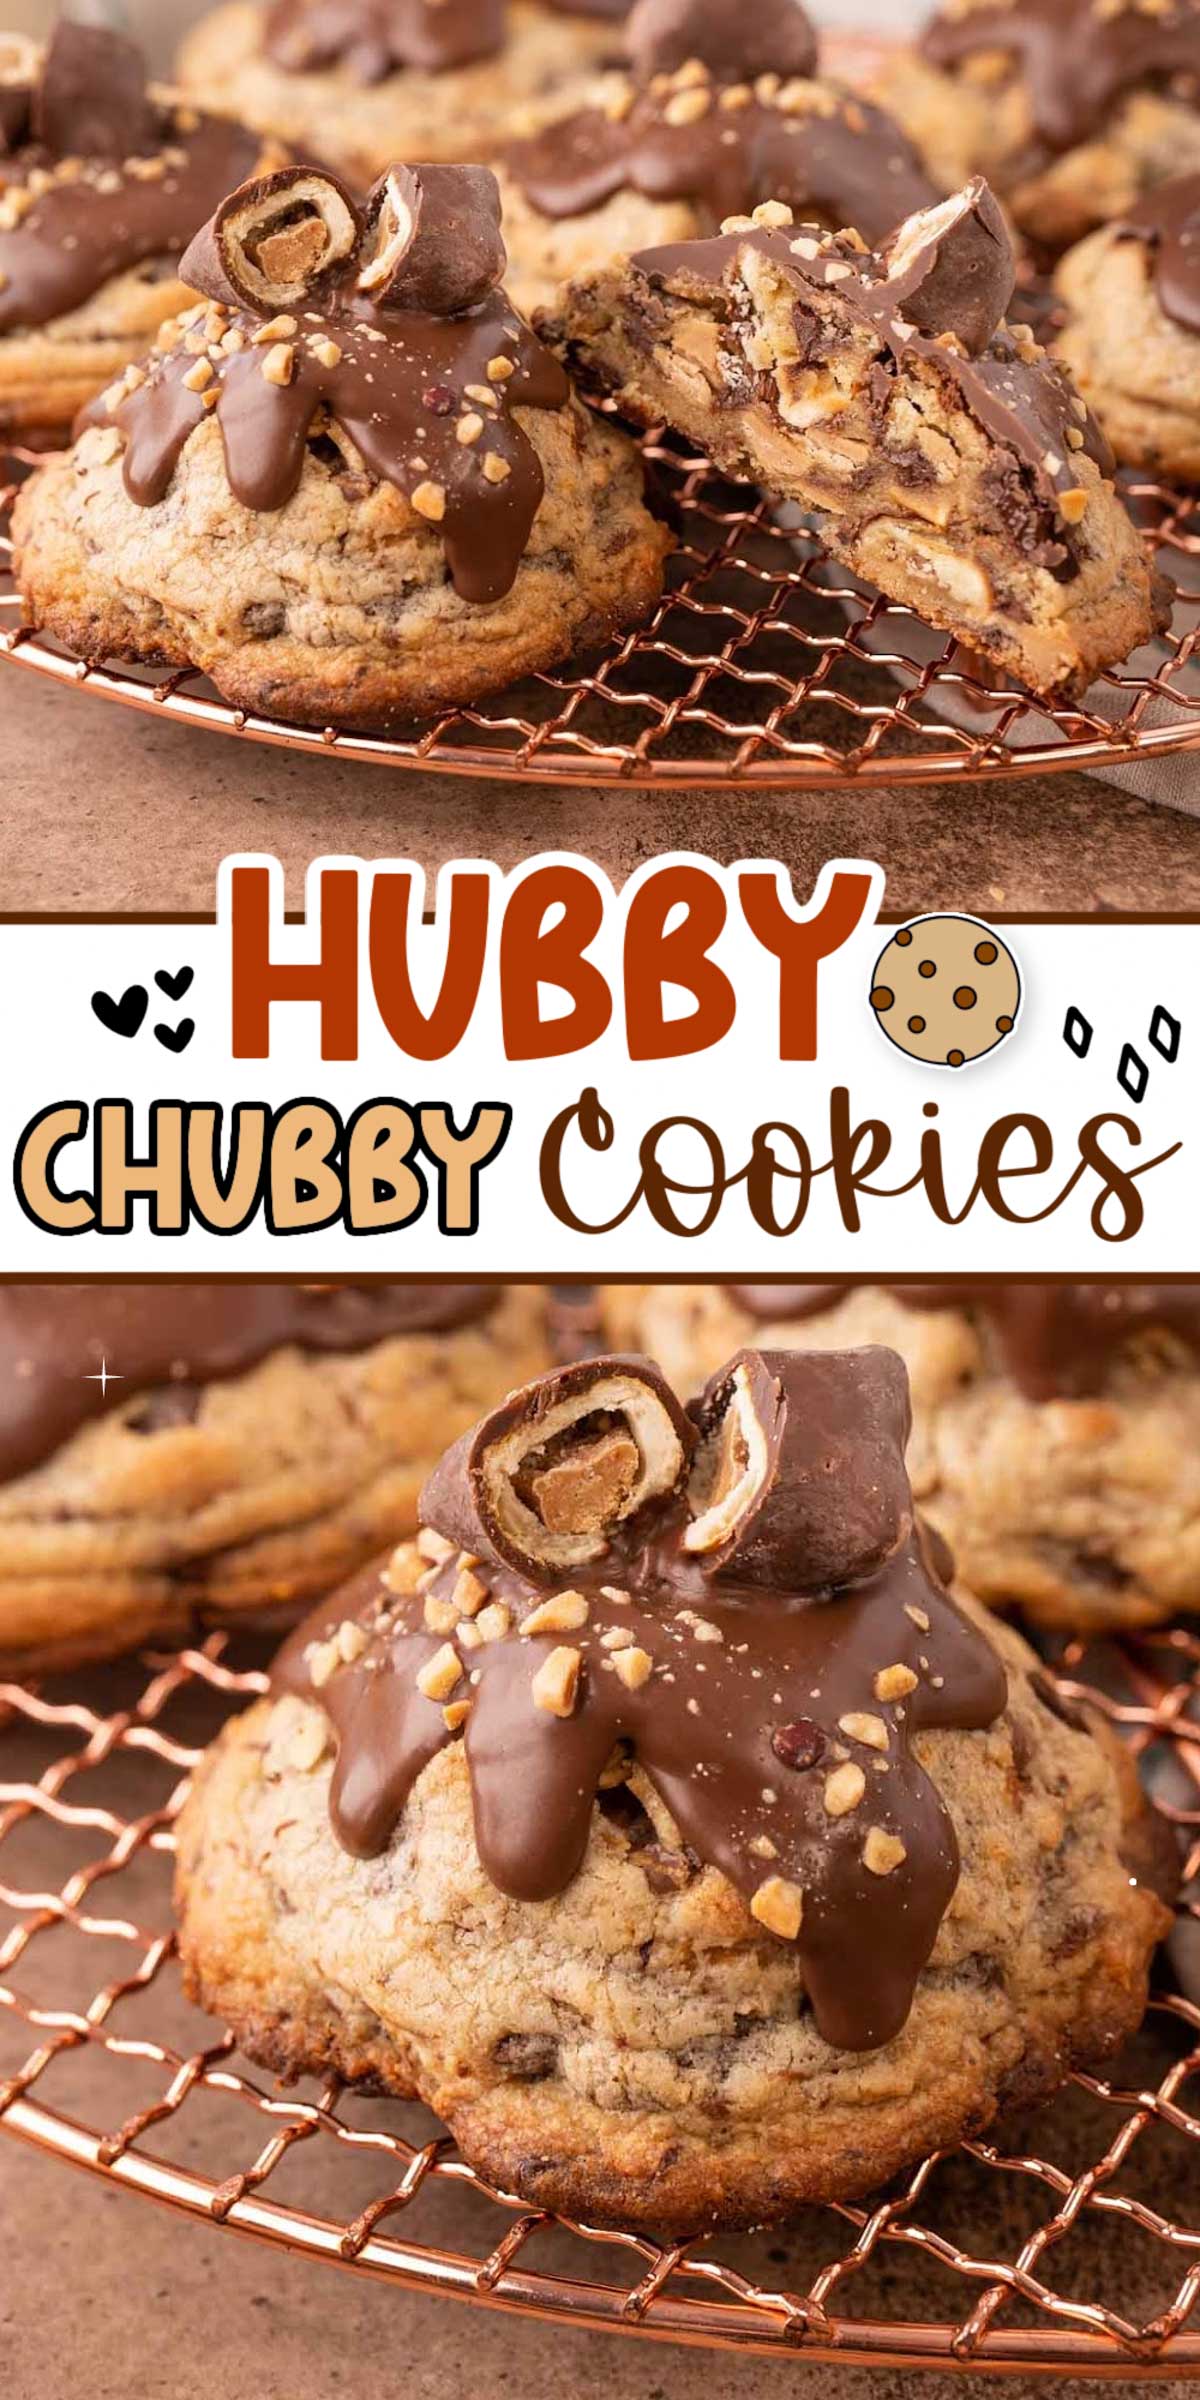 These Chubby Hubby Cookies are homemade salty, sweet cookies that are filled with chocolate-covered peanut butter pretzels, chocolate, and peanut butter chips! Makes a dozen delicious cookies in just under an hour!  via @sugarandsoulco